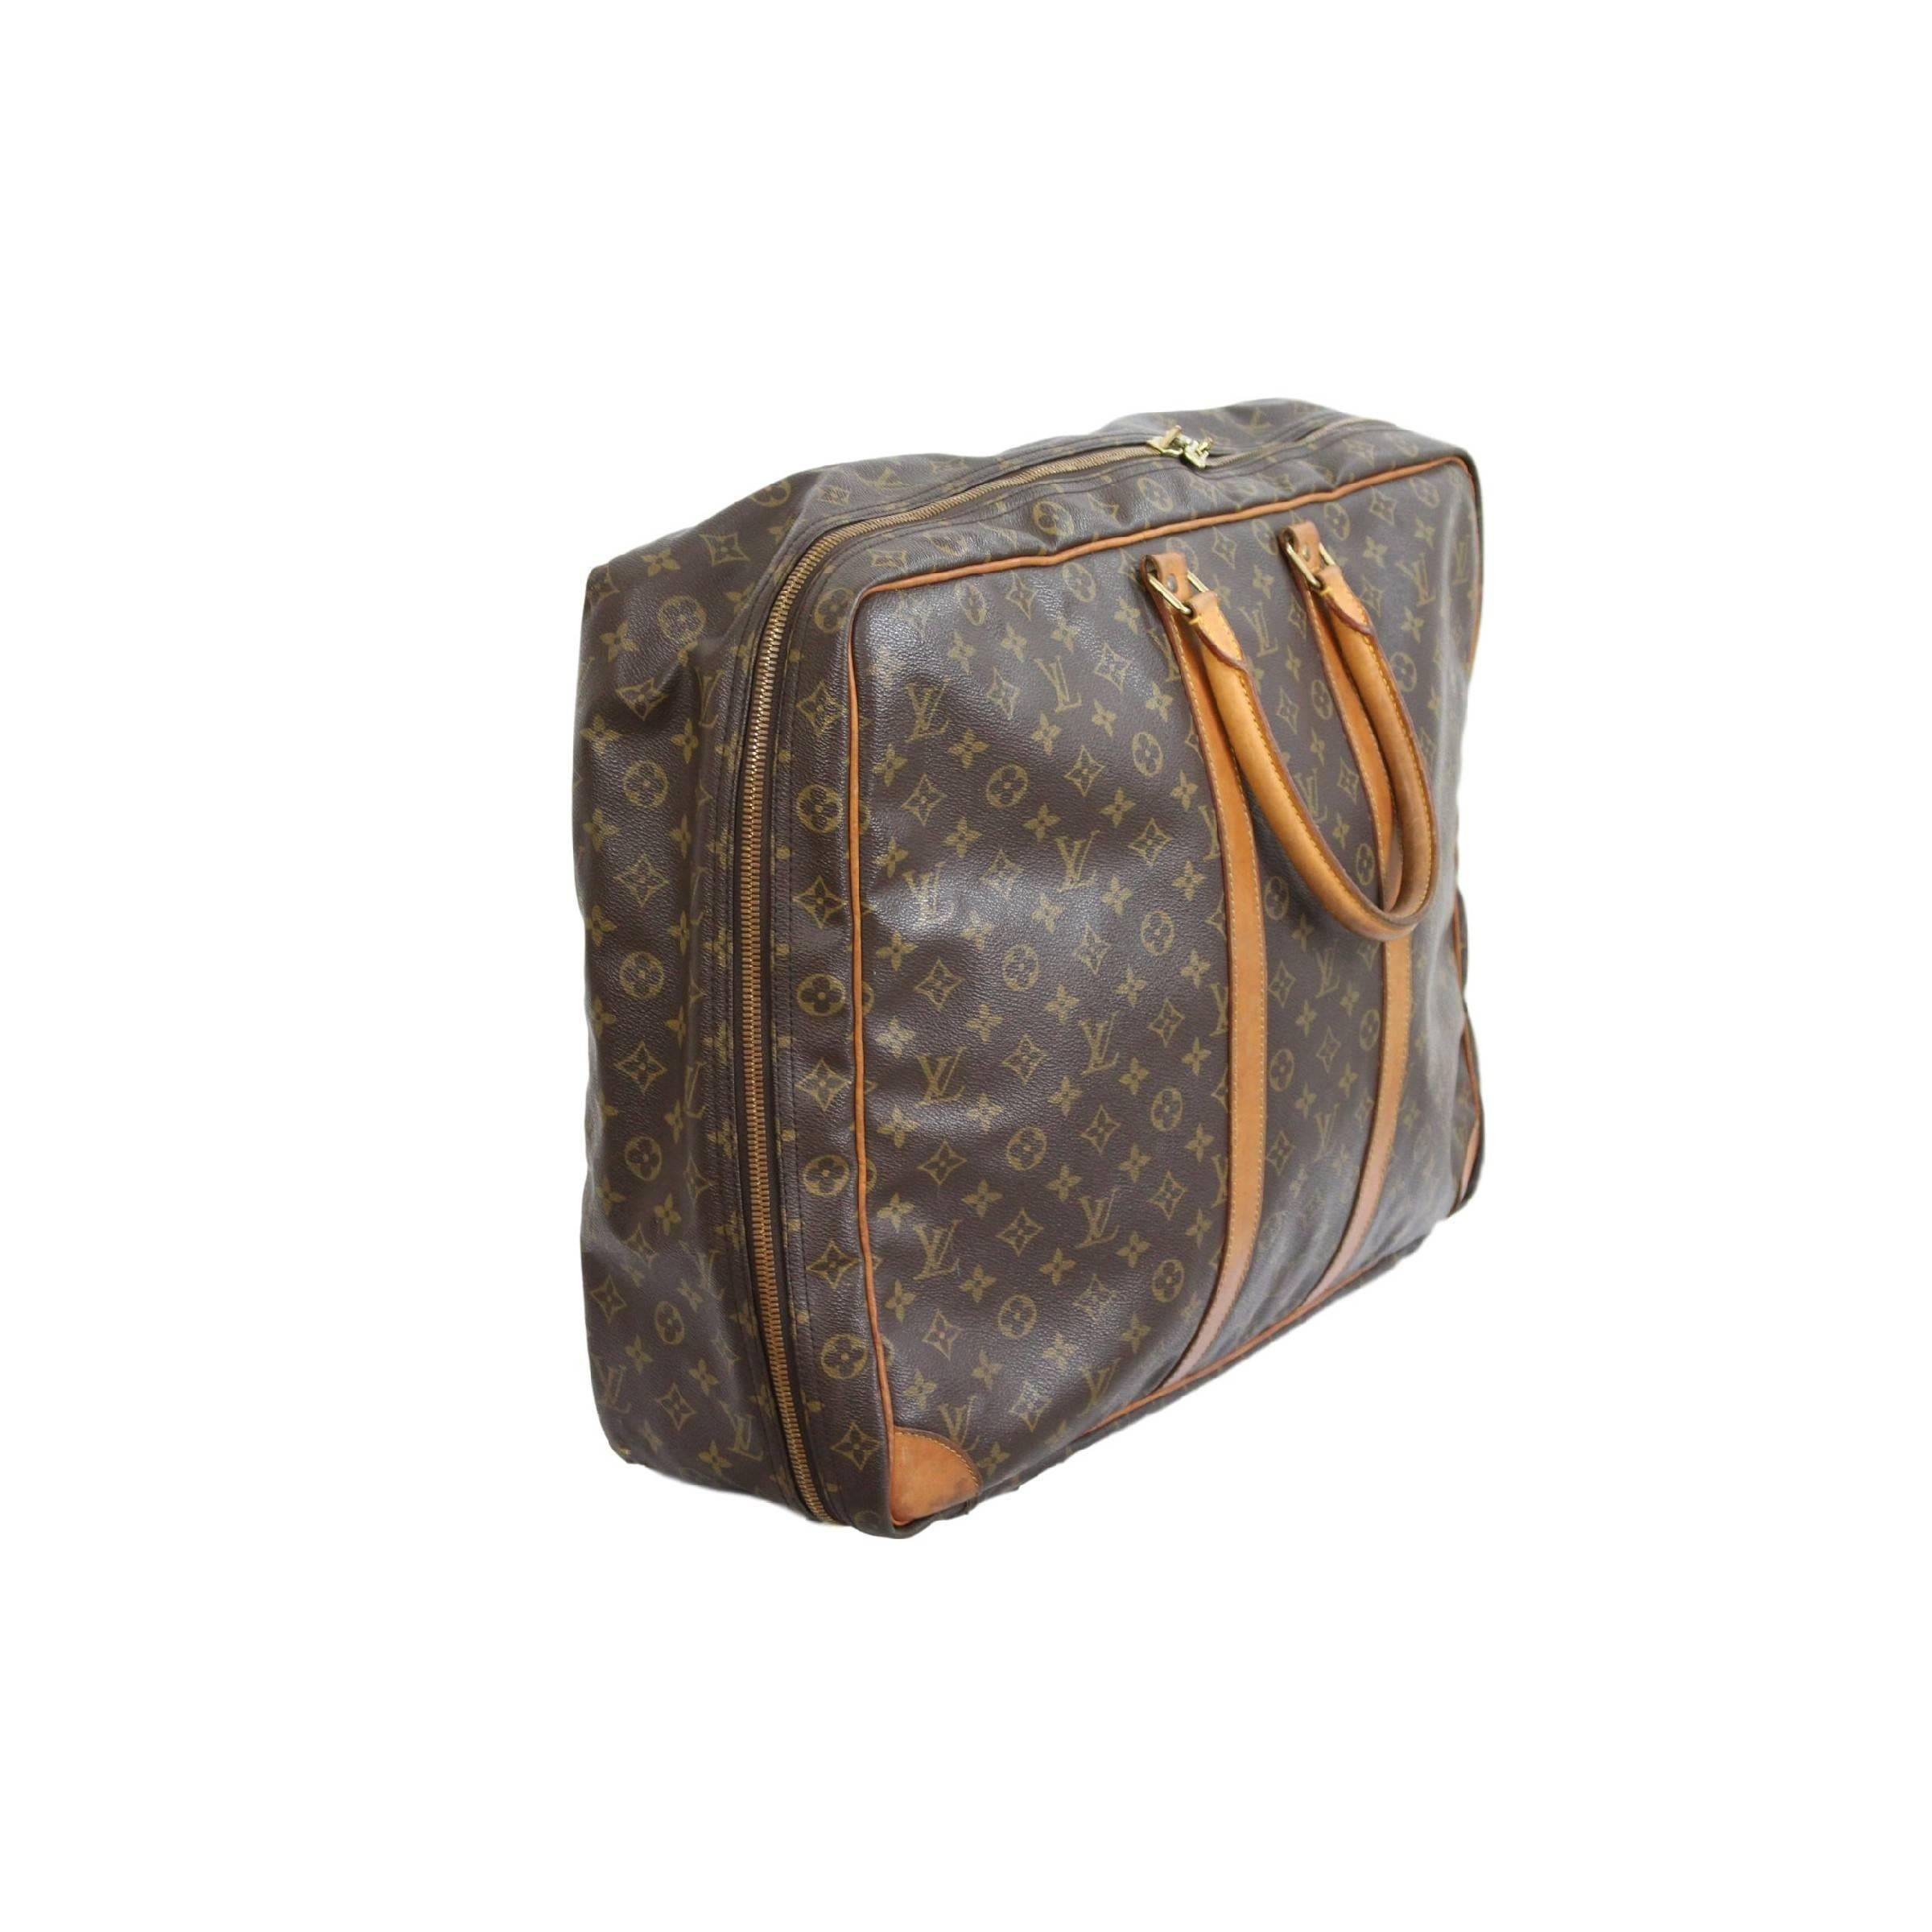 Louis Vuitton Sirius 55 travel bag Suitcase Brown Vintage Leather In Good Condition For Sale In Brindisi, IT